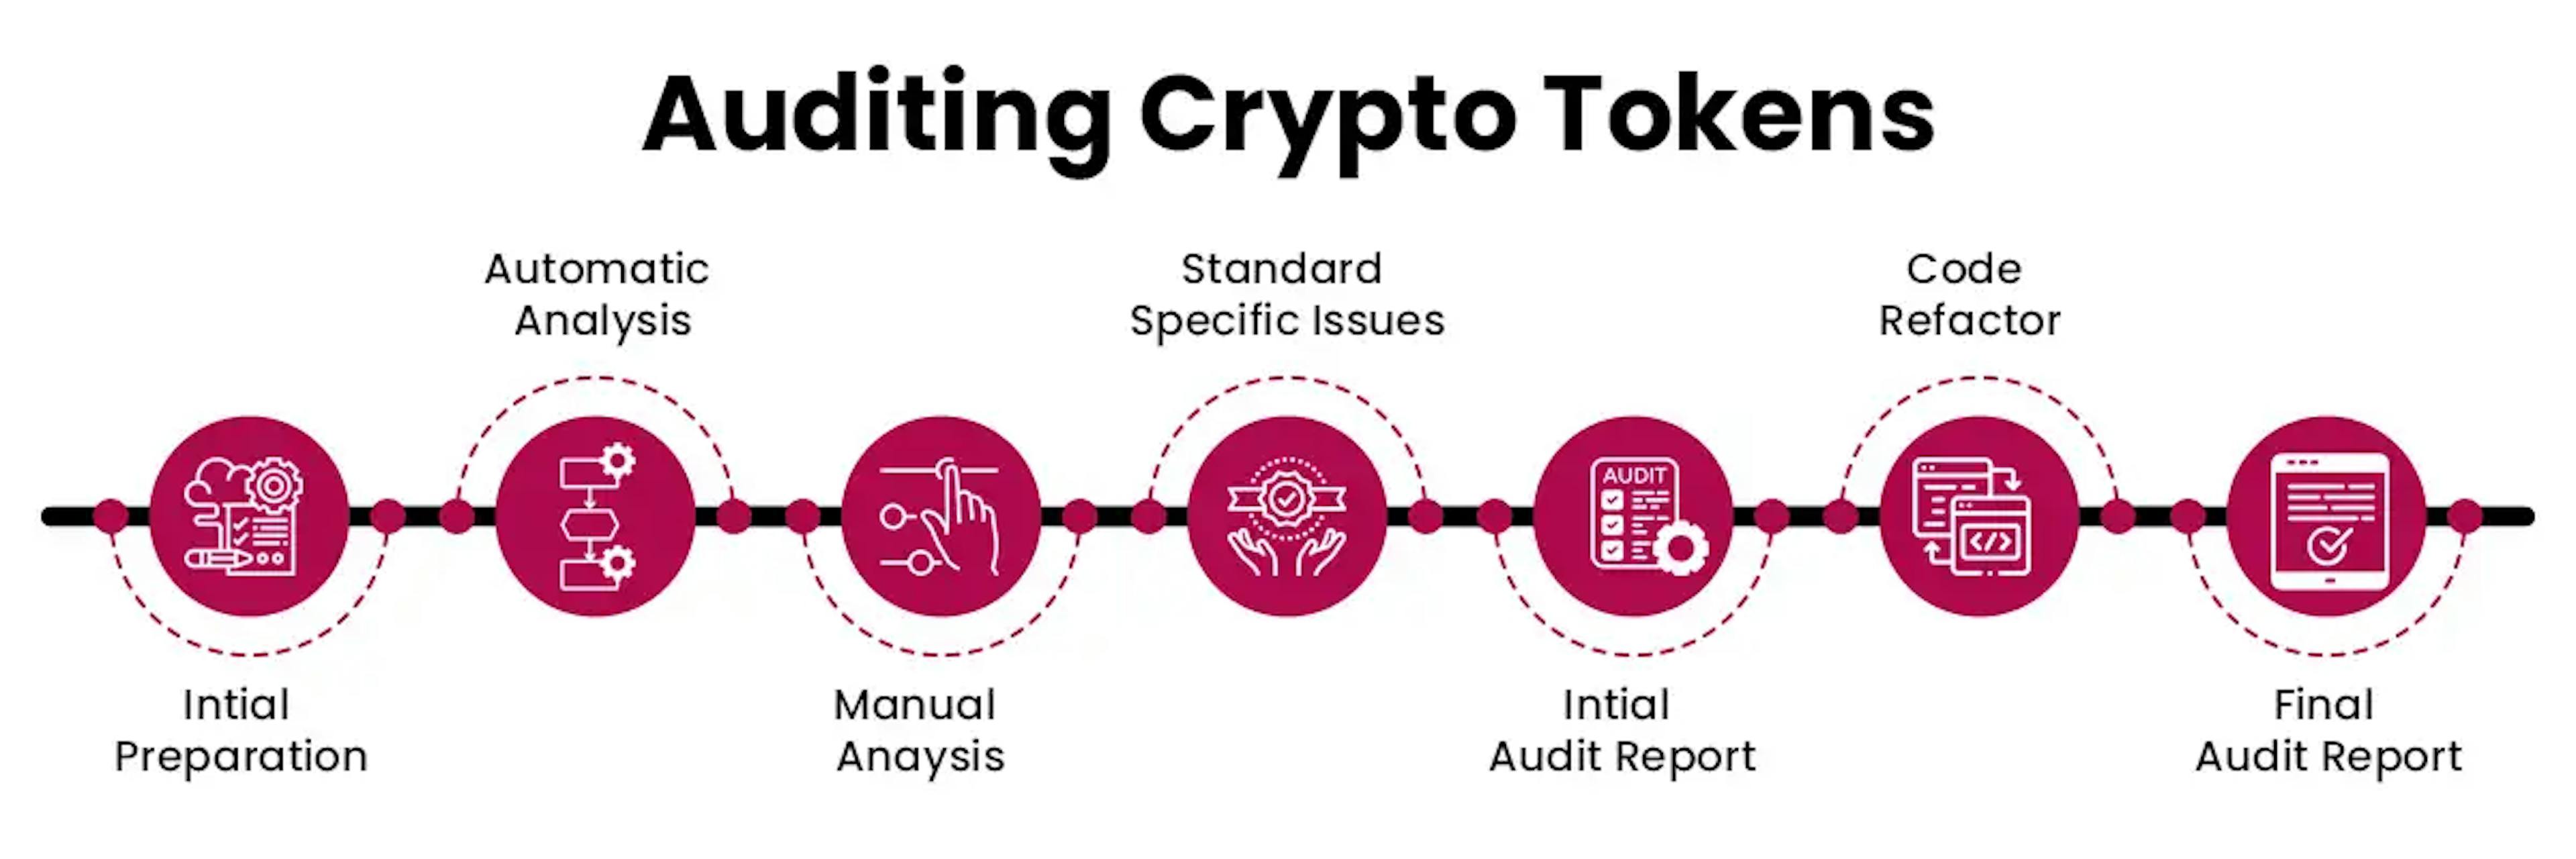 Auditing Crypto Tokens